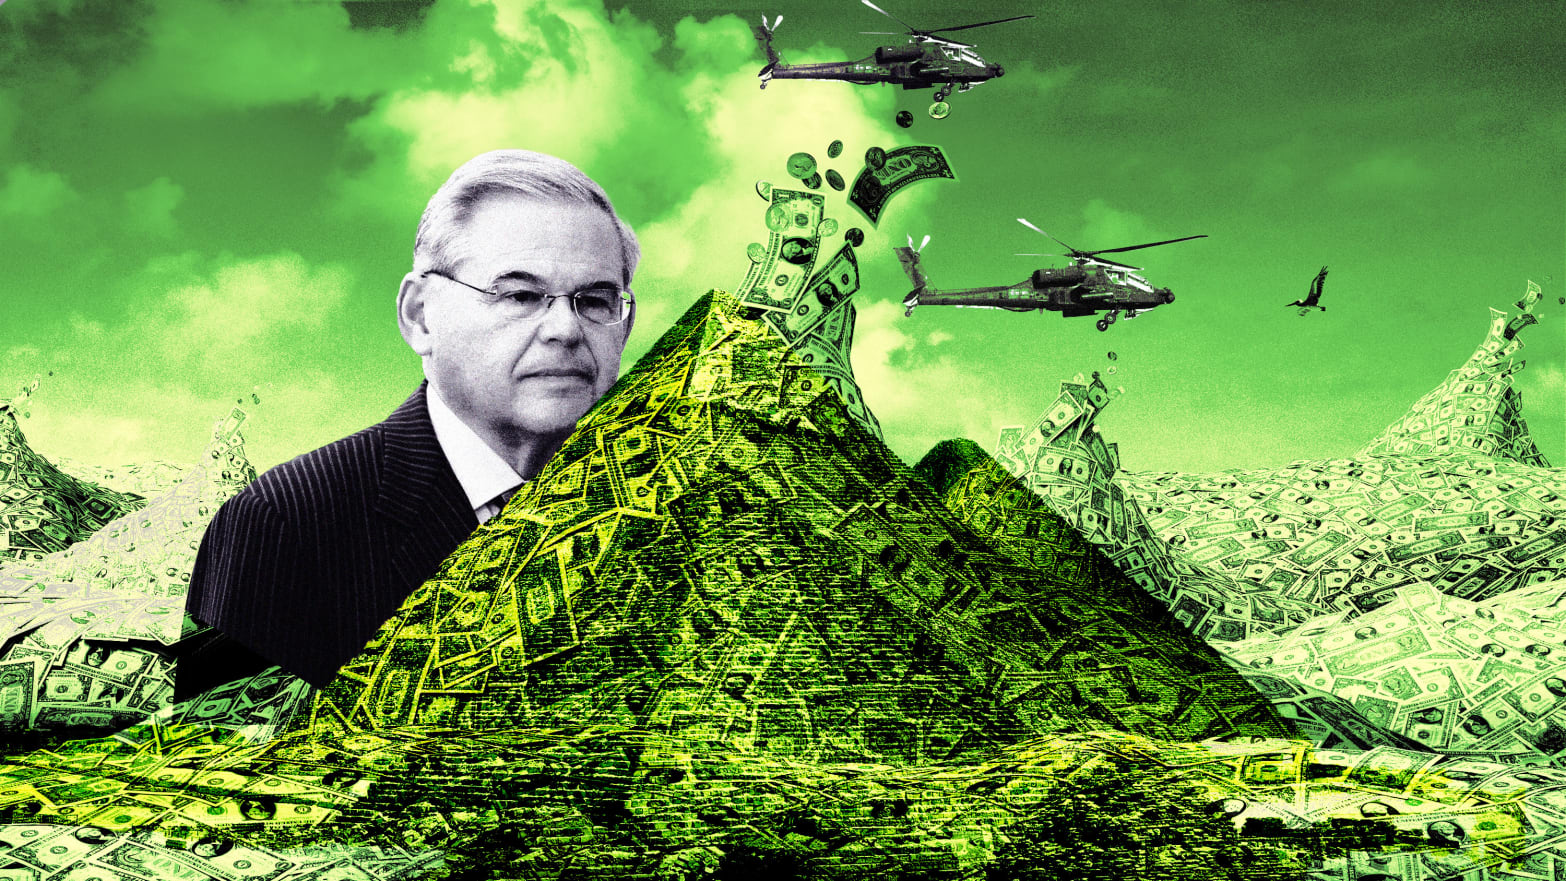 An illustration including a photo of Senator Robert Menendez, Apache helicopters, large piles of Money, and the Pyramids of Giza